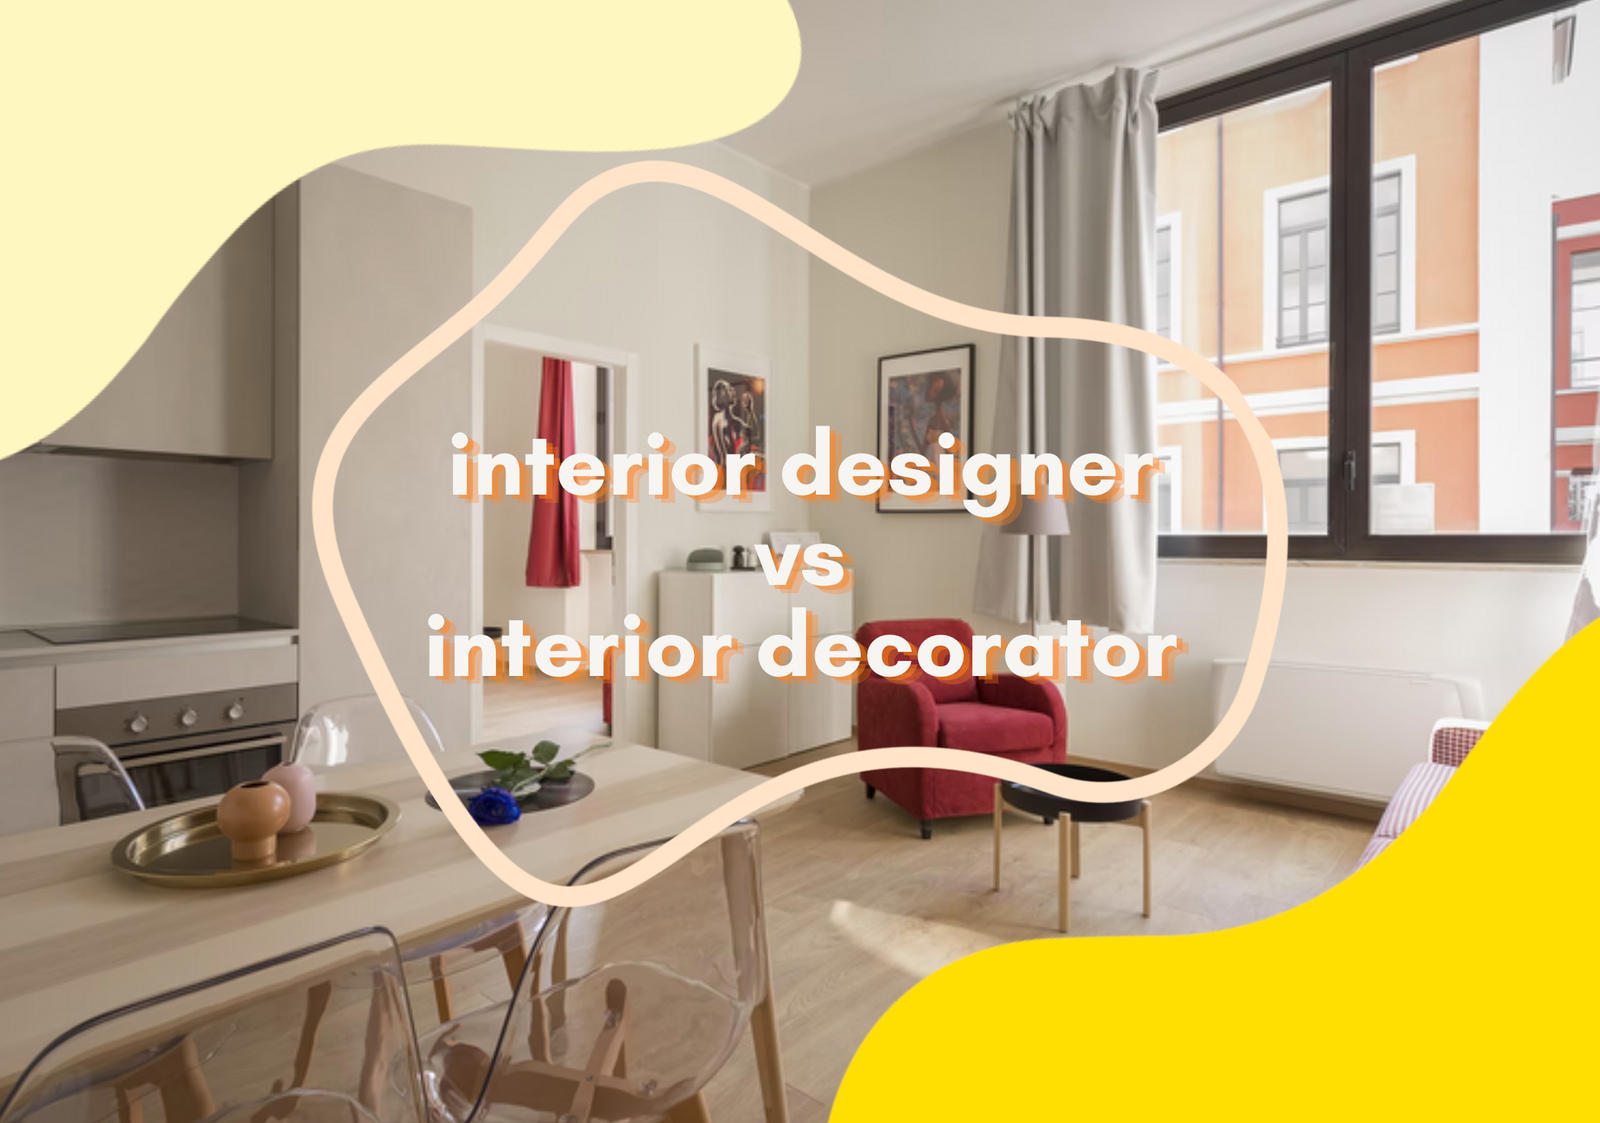 interior designer vs decorator - which one should you be?